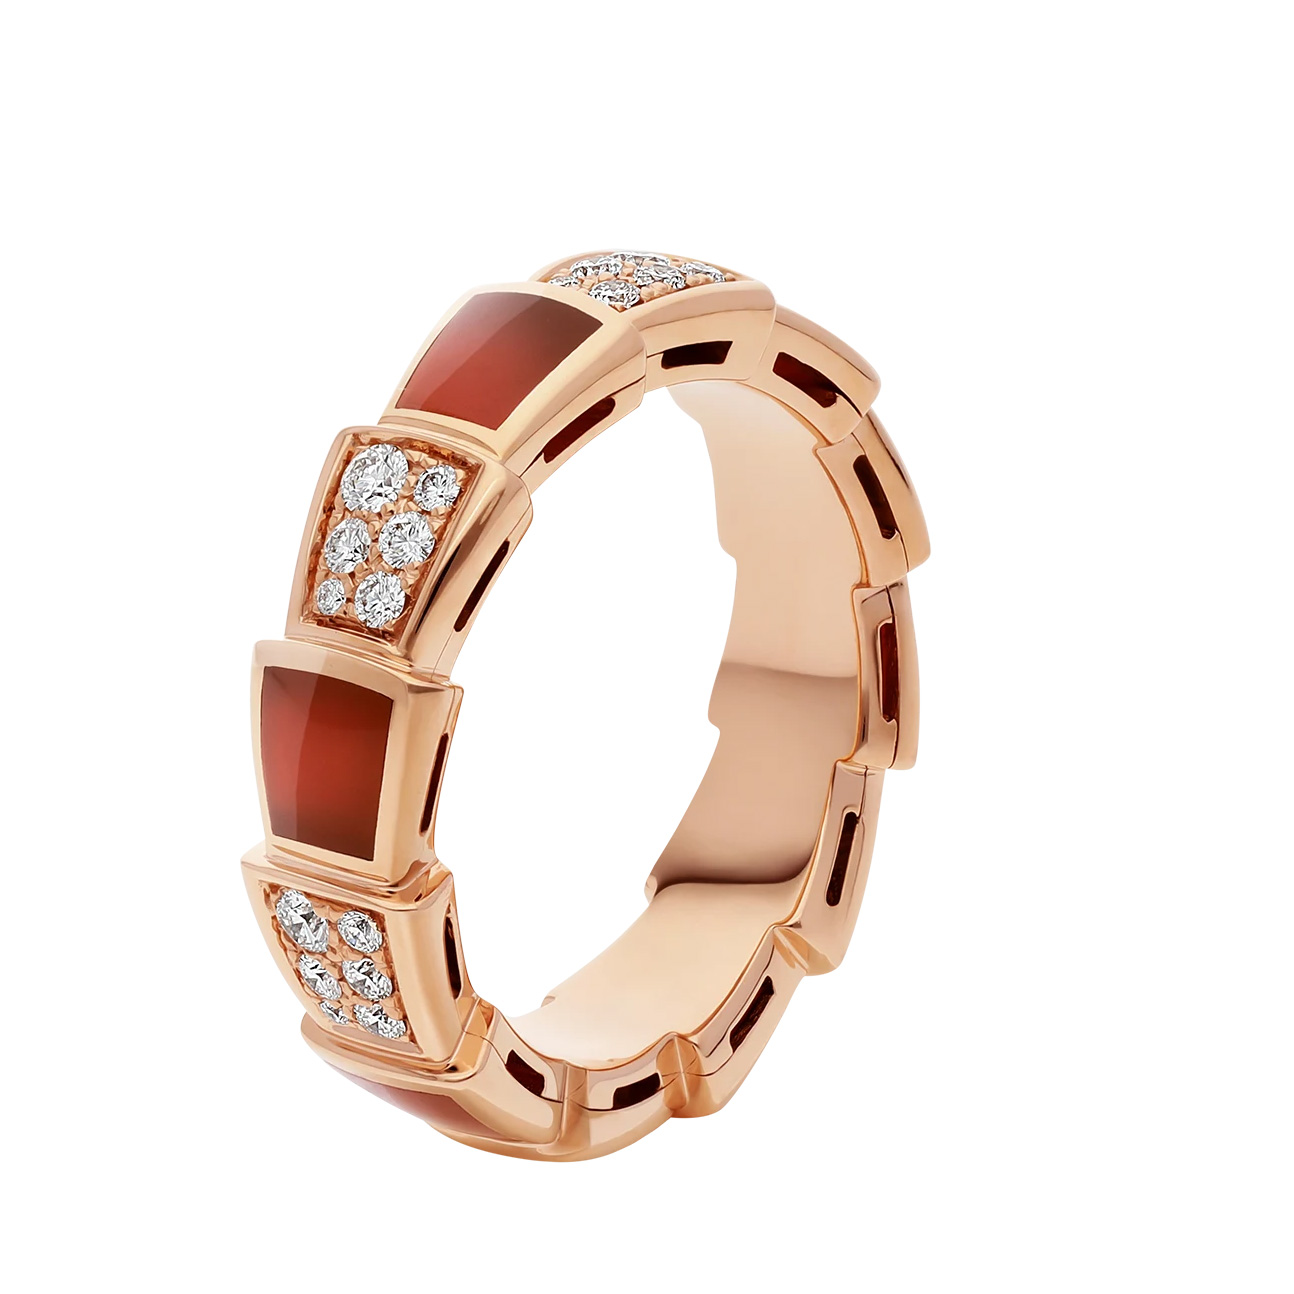 Wholesale OEM band ring in 18 kt rose gold OEM/ODM Jewelry, set with carnelian elements and pavé diamonds Personalised design